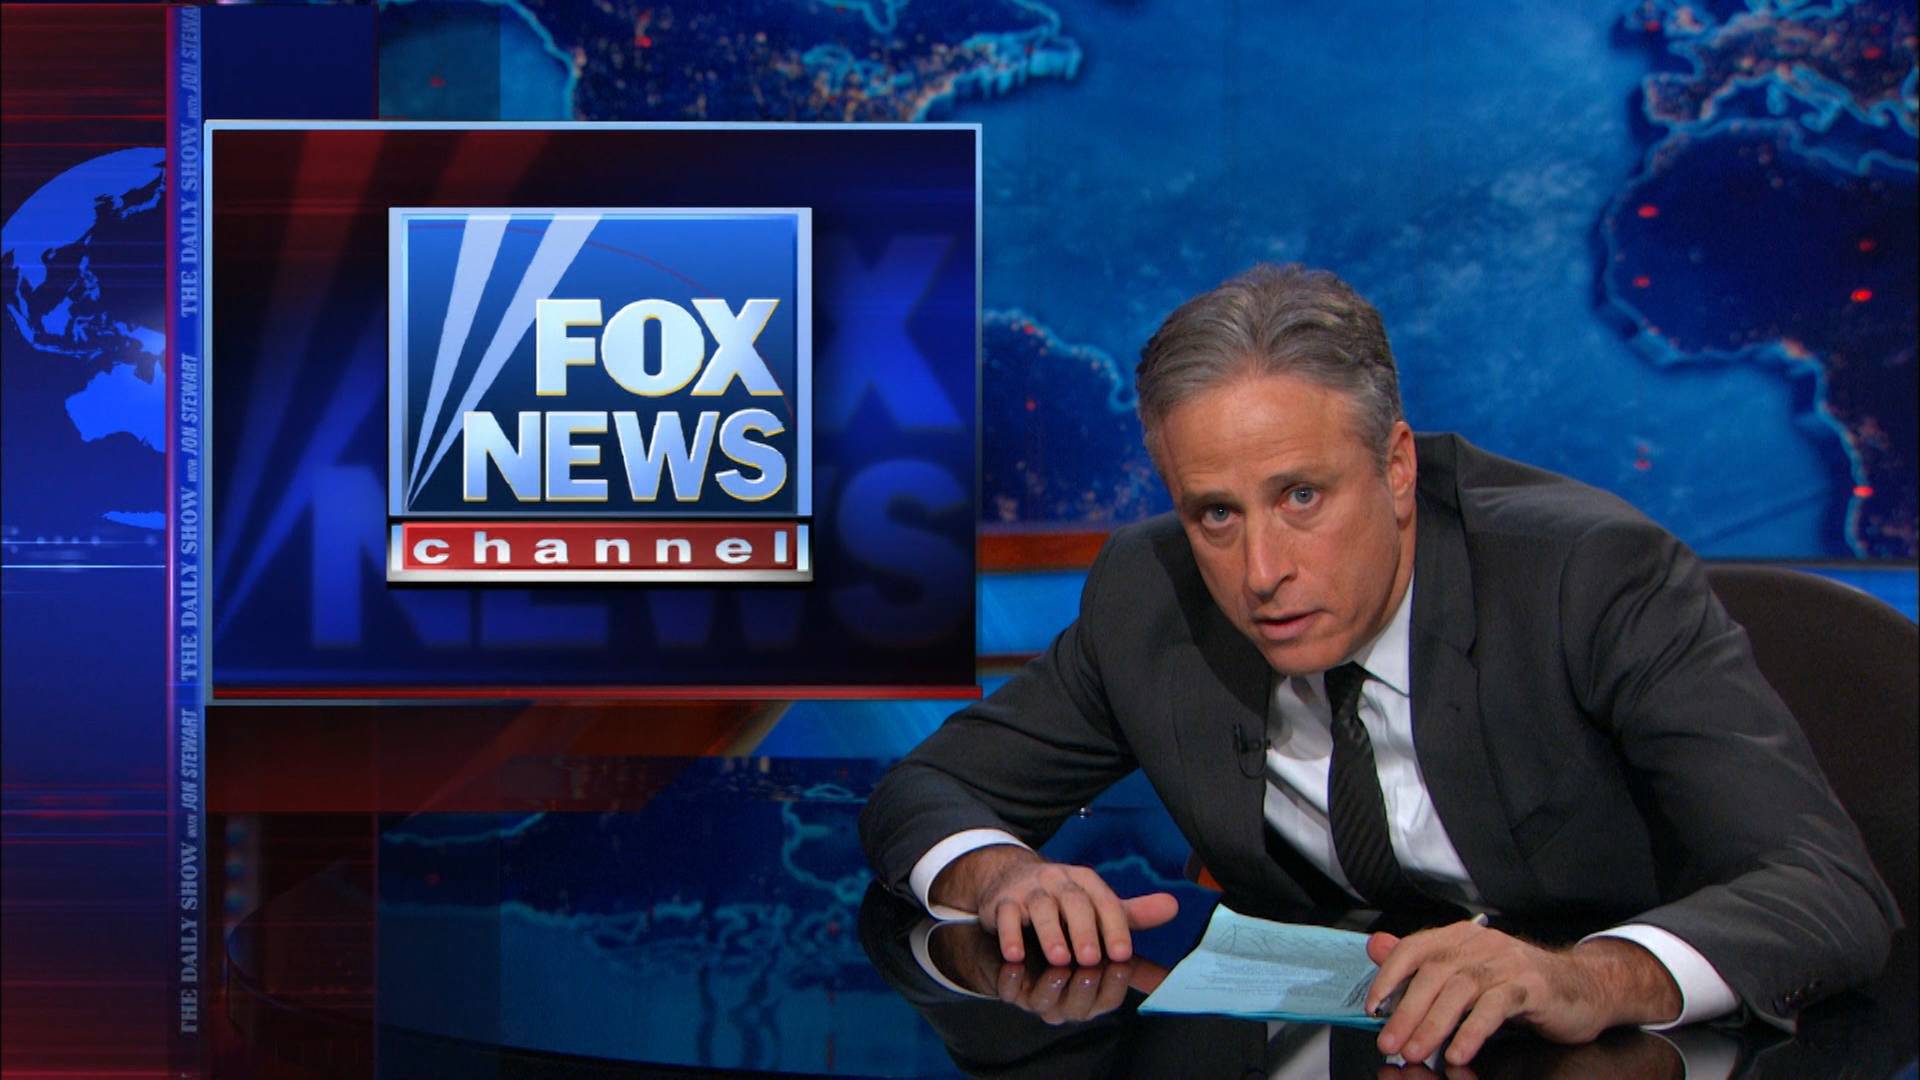 Porks and Habitation - The Daily Show with Jon Stewart (Video Clip